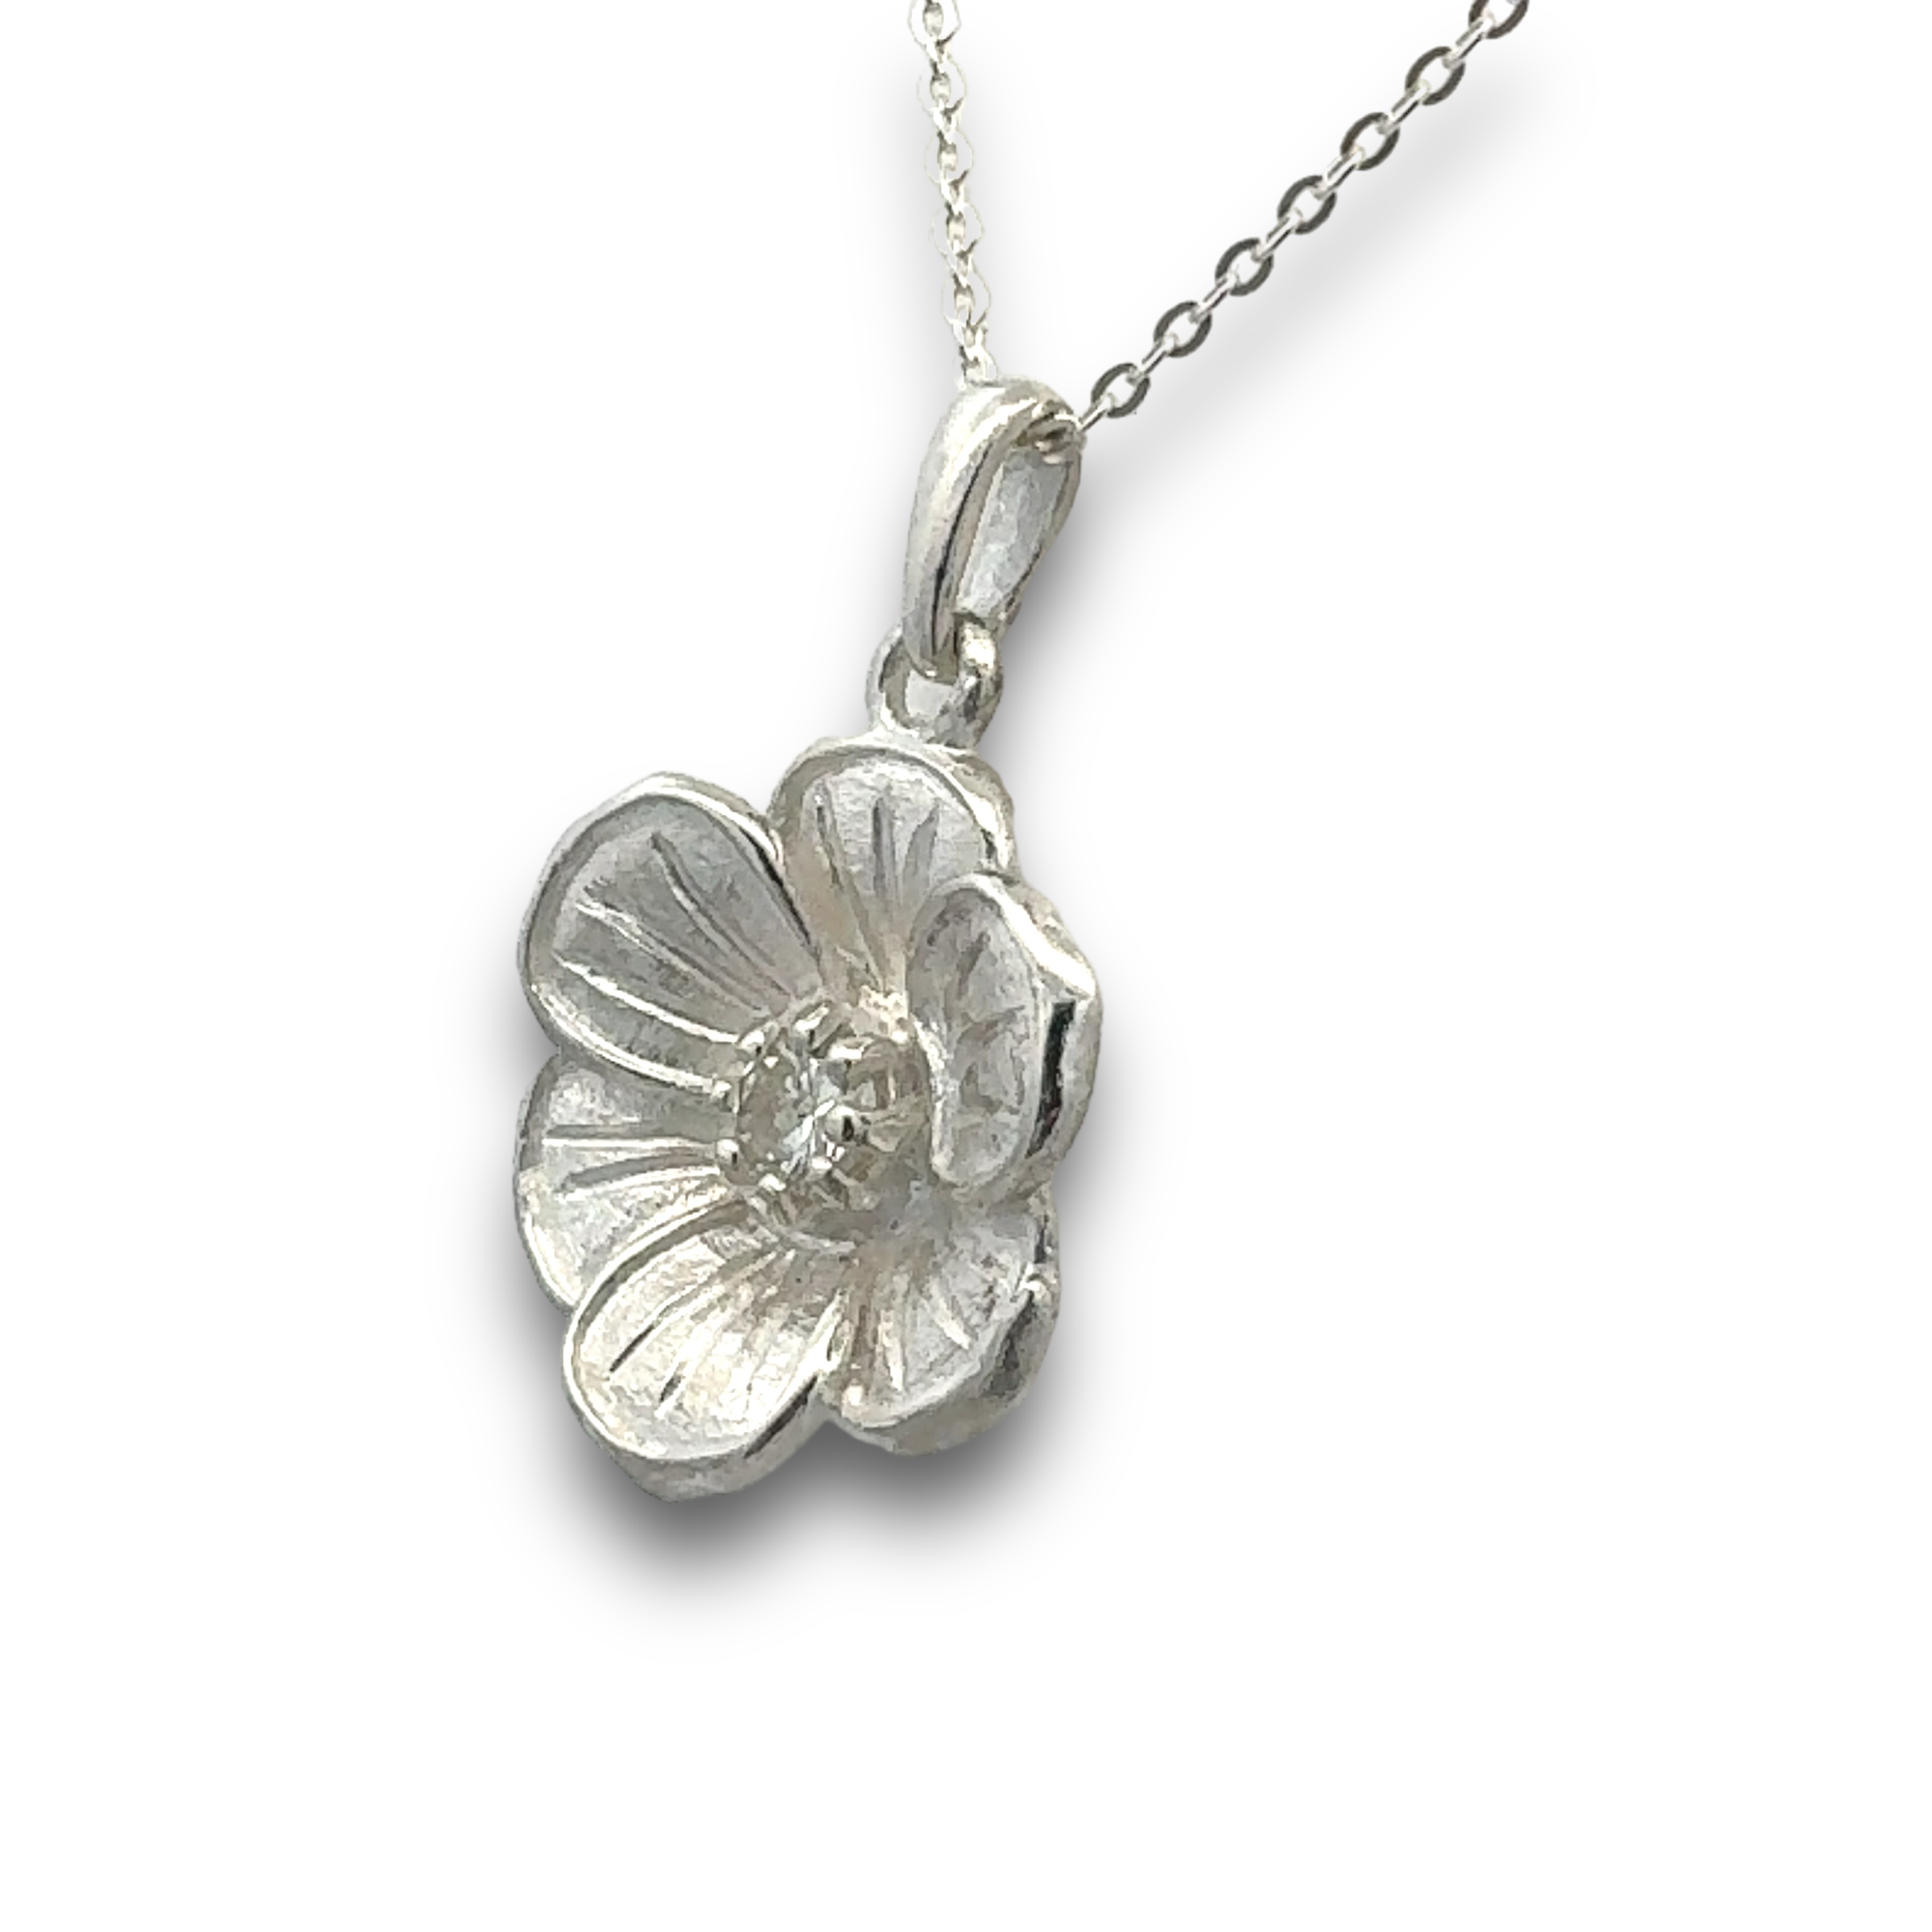 Flower Necklace with Diamond in Sterling Silver